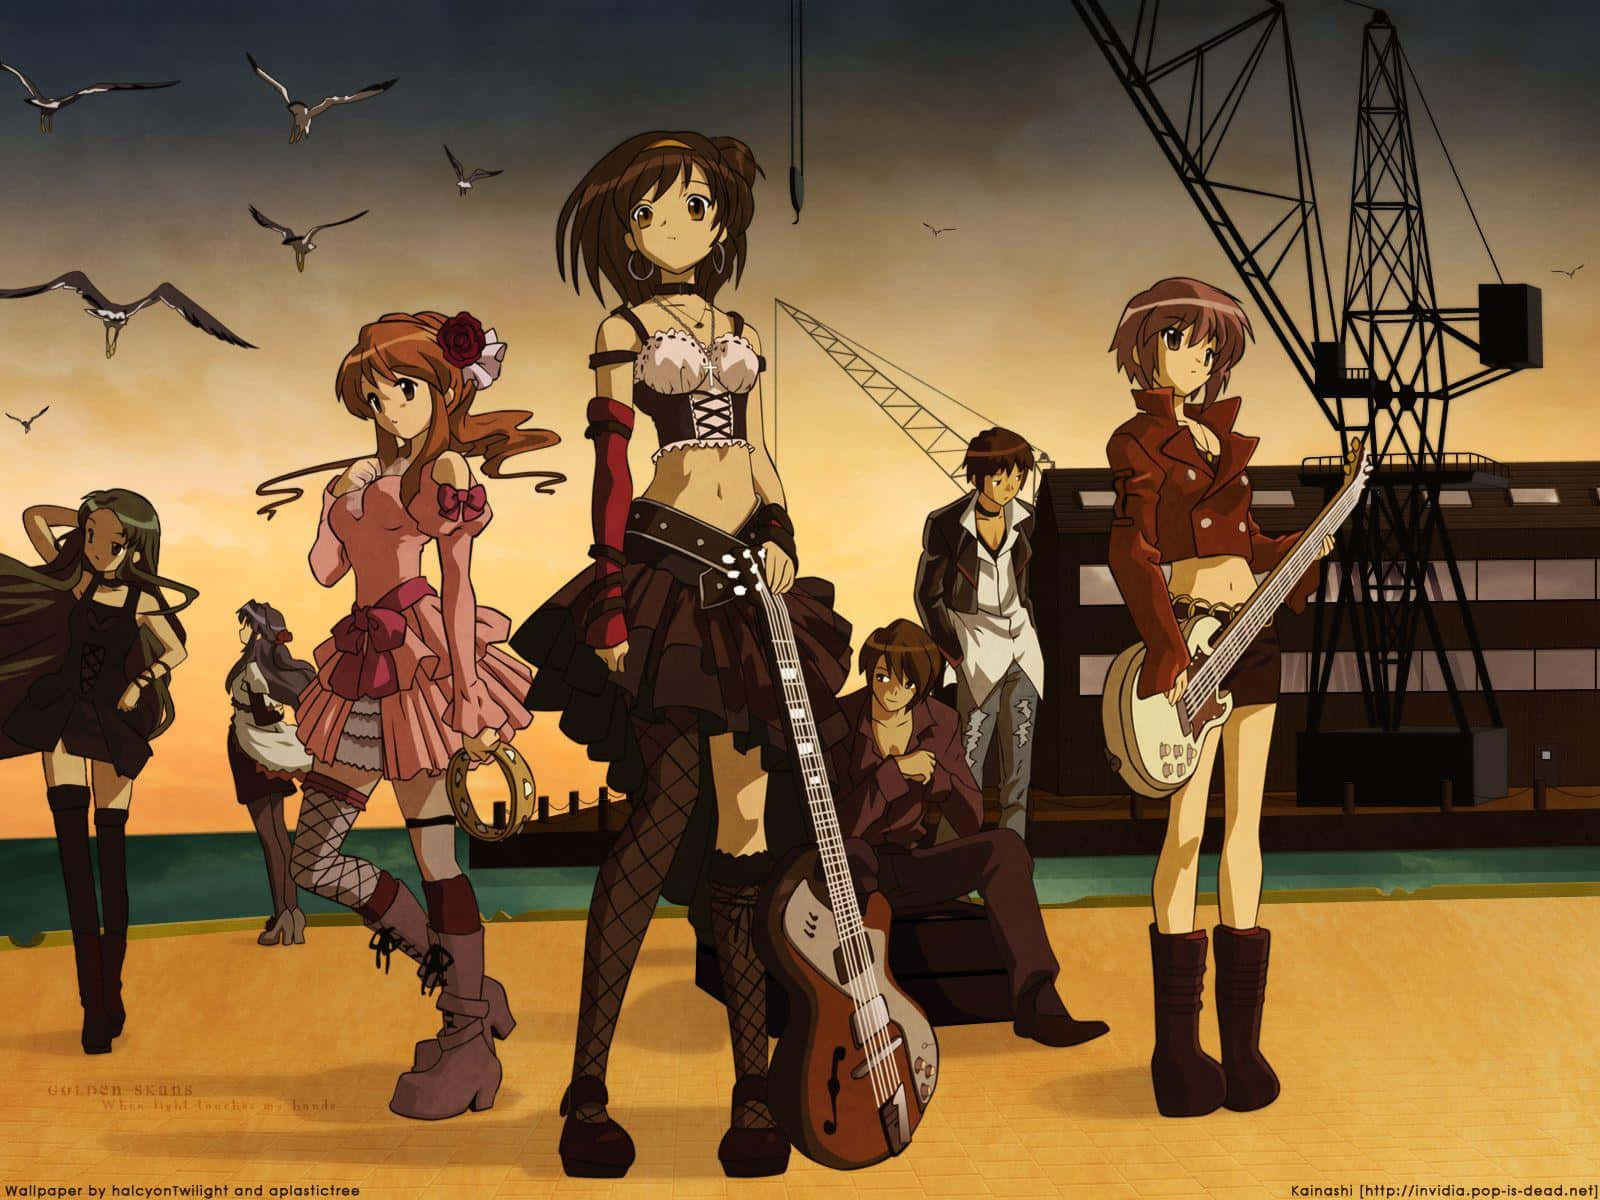 Celebrating Our Story with The Melancholy of Haruhi Suzumiya Wallpaper Wallpaper